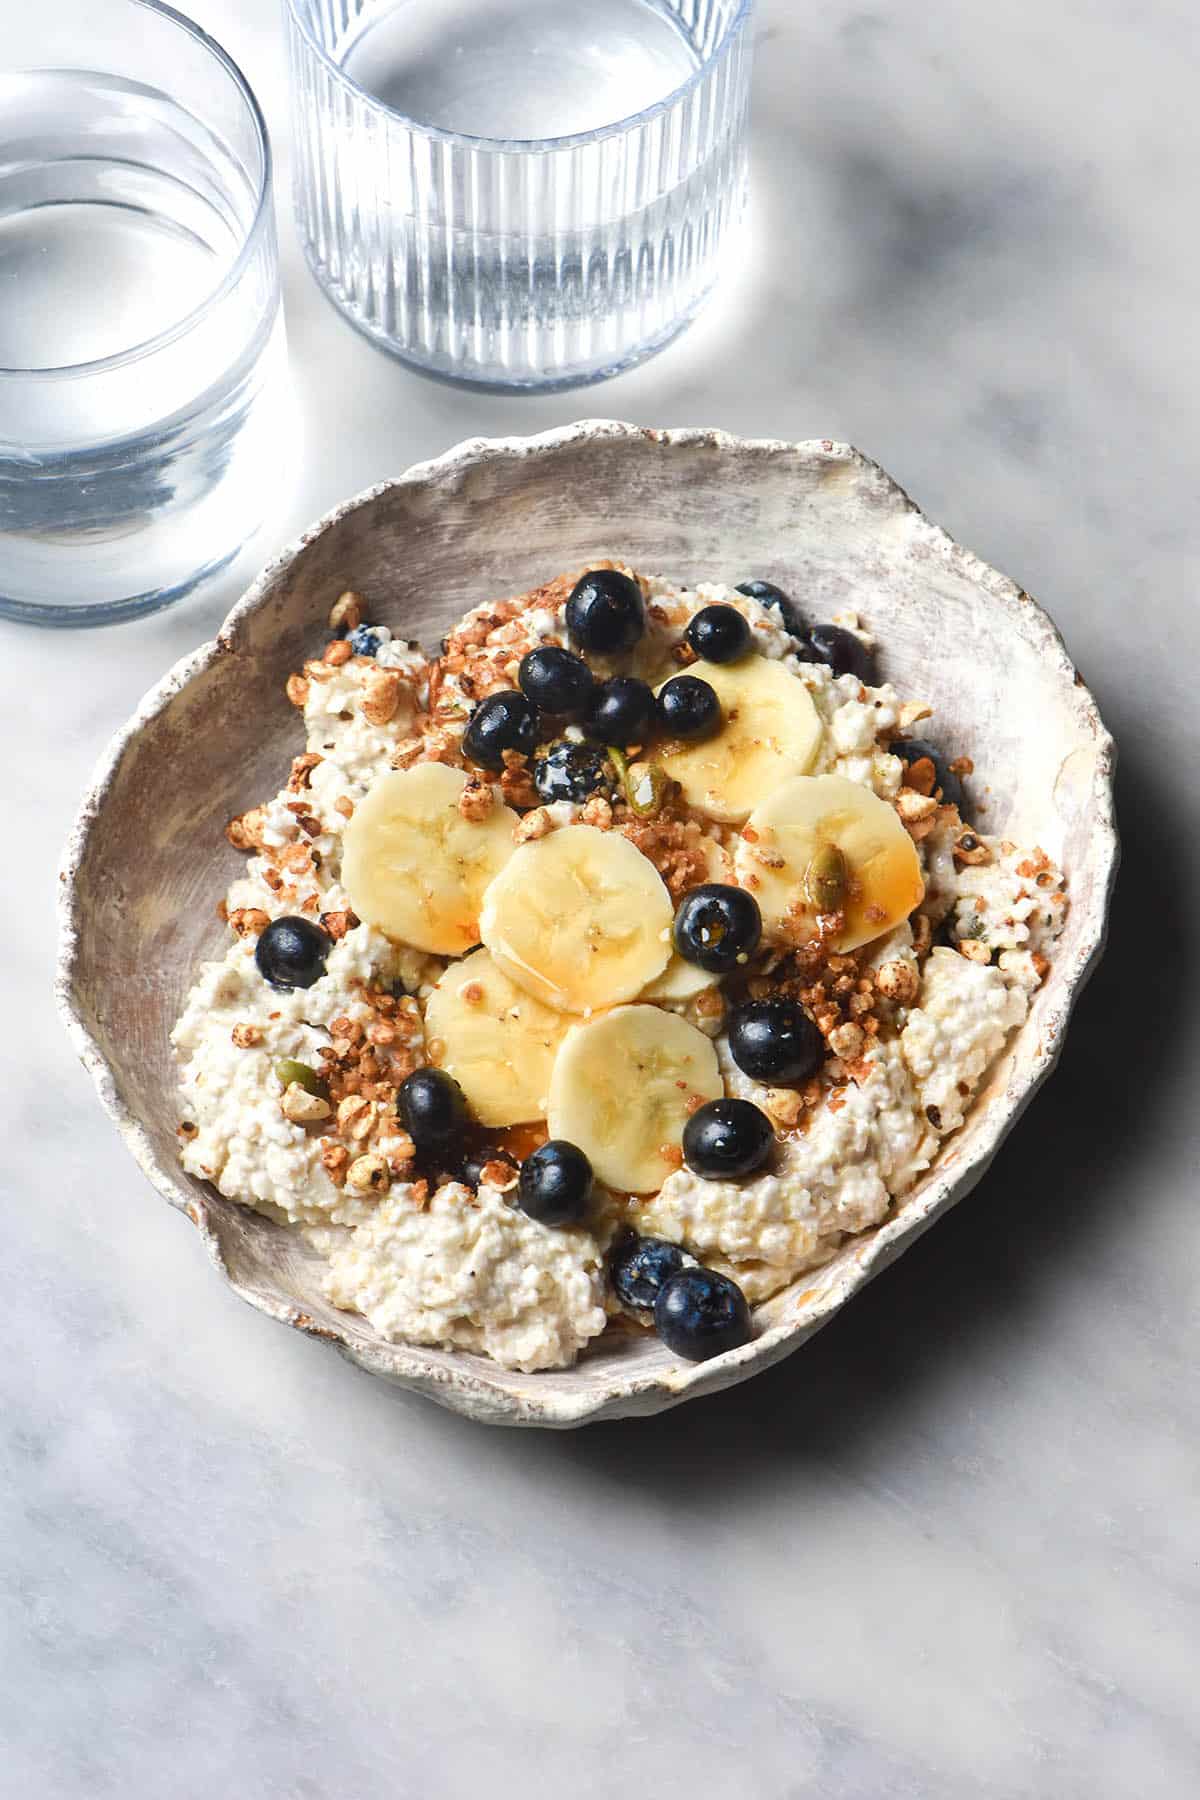 An aerial image of gluten free overnight oats that have been decanted in a textured white ceramic bowl and topped with banana slices, blueberries and maple syrup. The bowl sits atop a white marble table and two sunlit water glasses sit to the top left of the image.